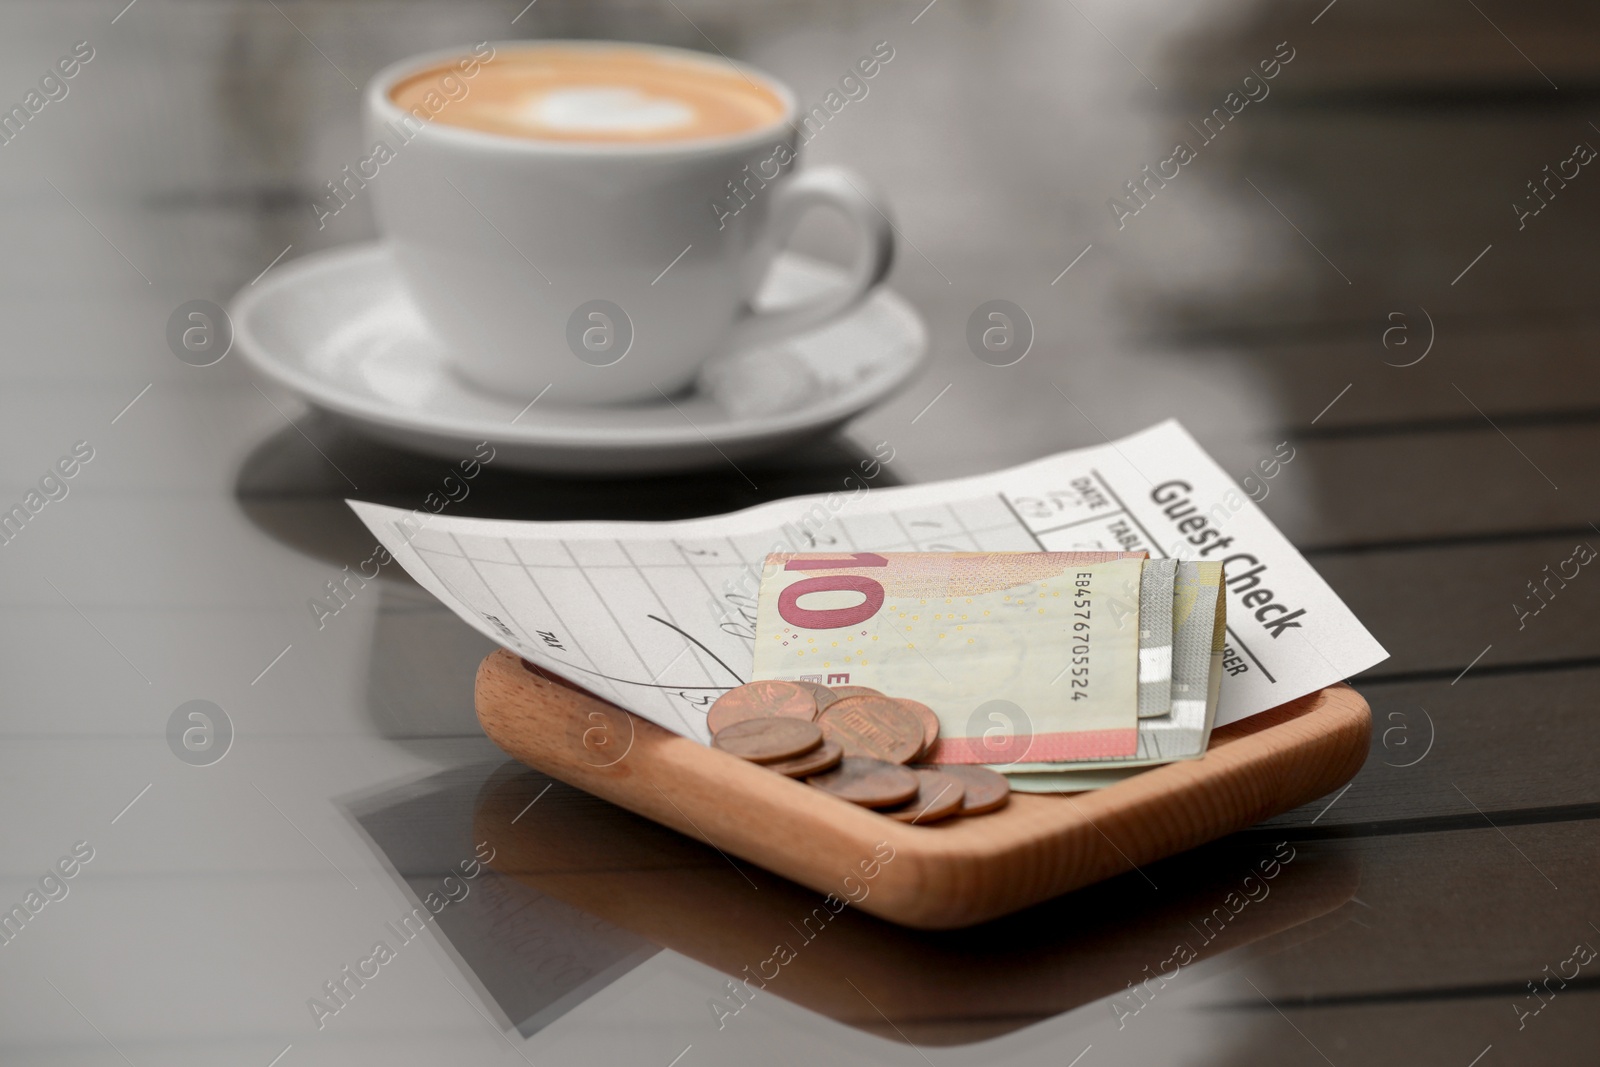 Photo of Tips, receipt and cup of coffee on table